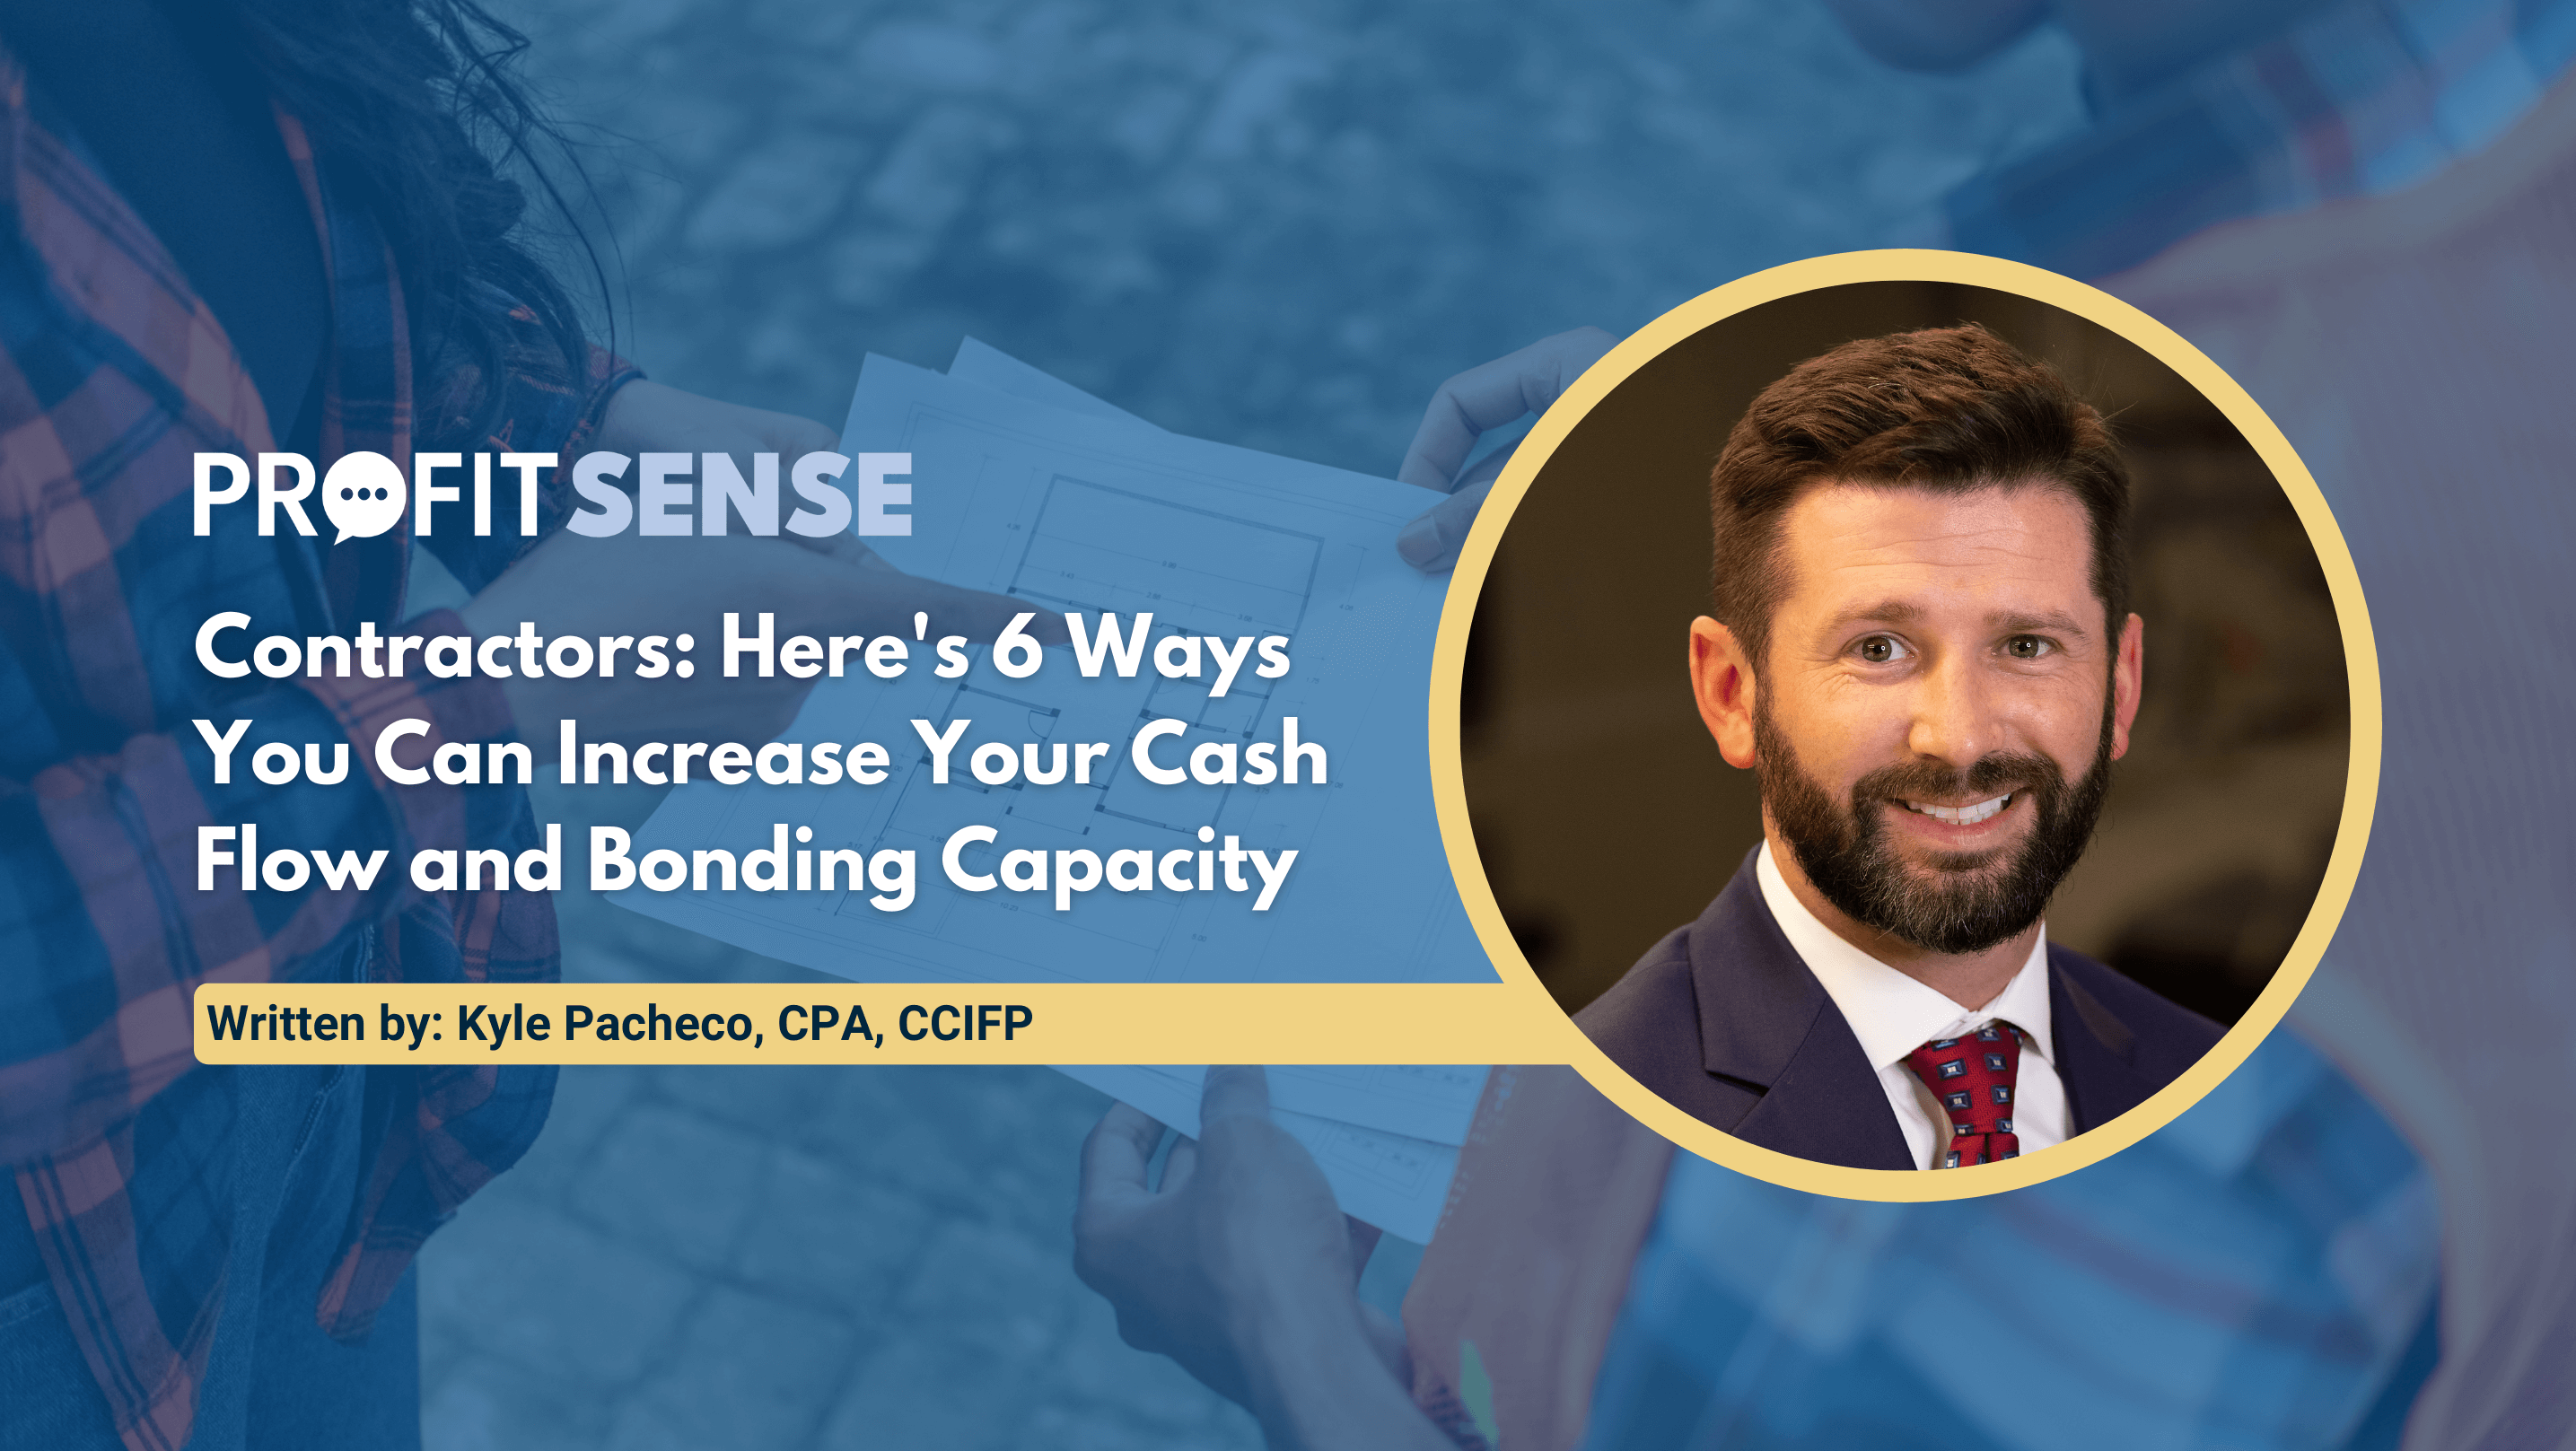 Contractors: Here's 6 Ways You Can Increase Your Cash Flow and Bonding Capacity